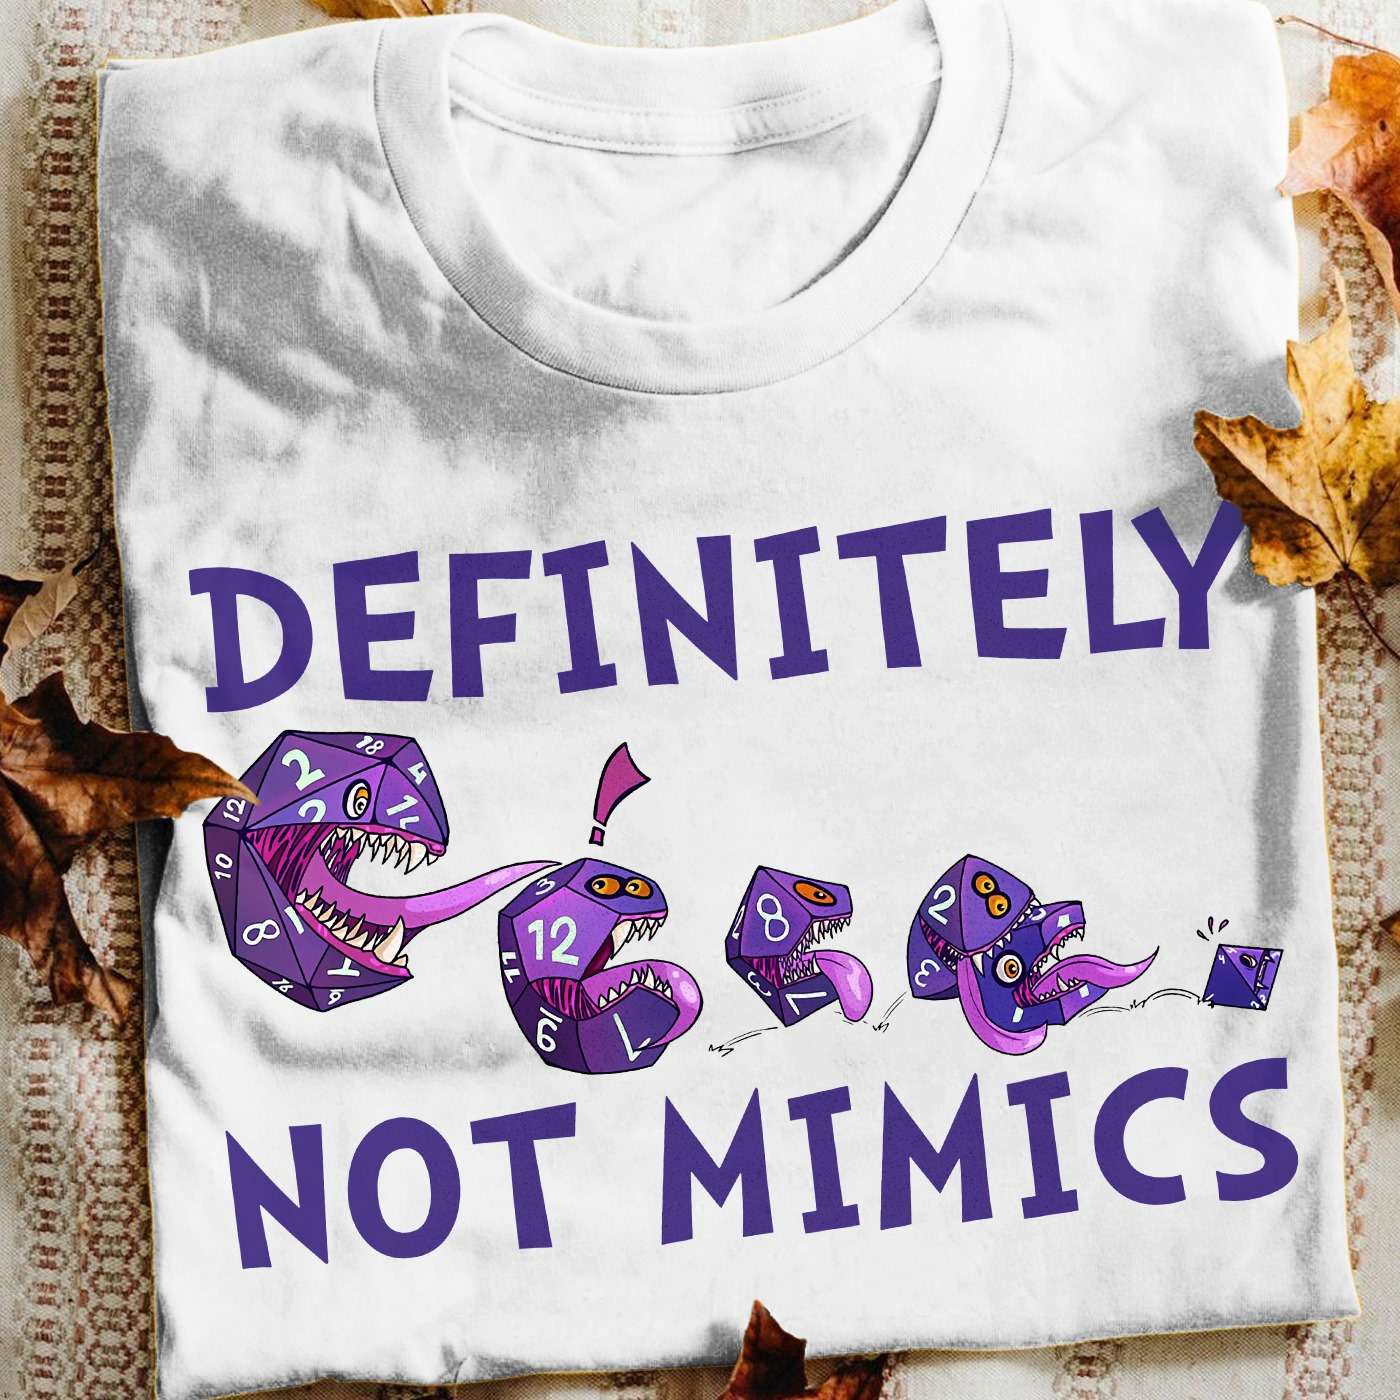 Definitely not mimics - Monster rolling dices, Dungeons and Dragons